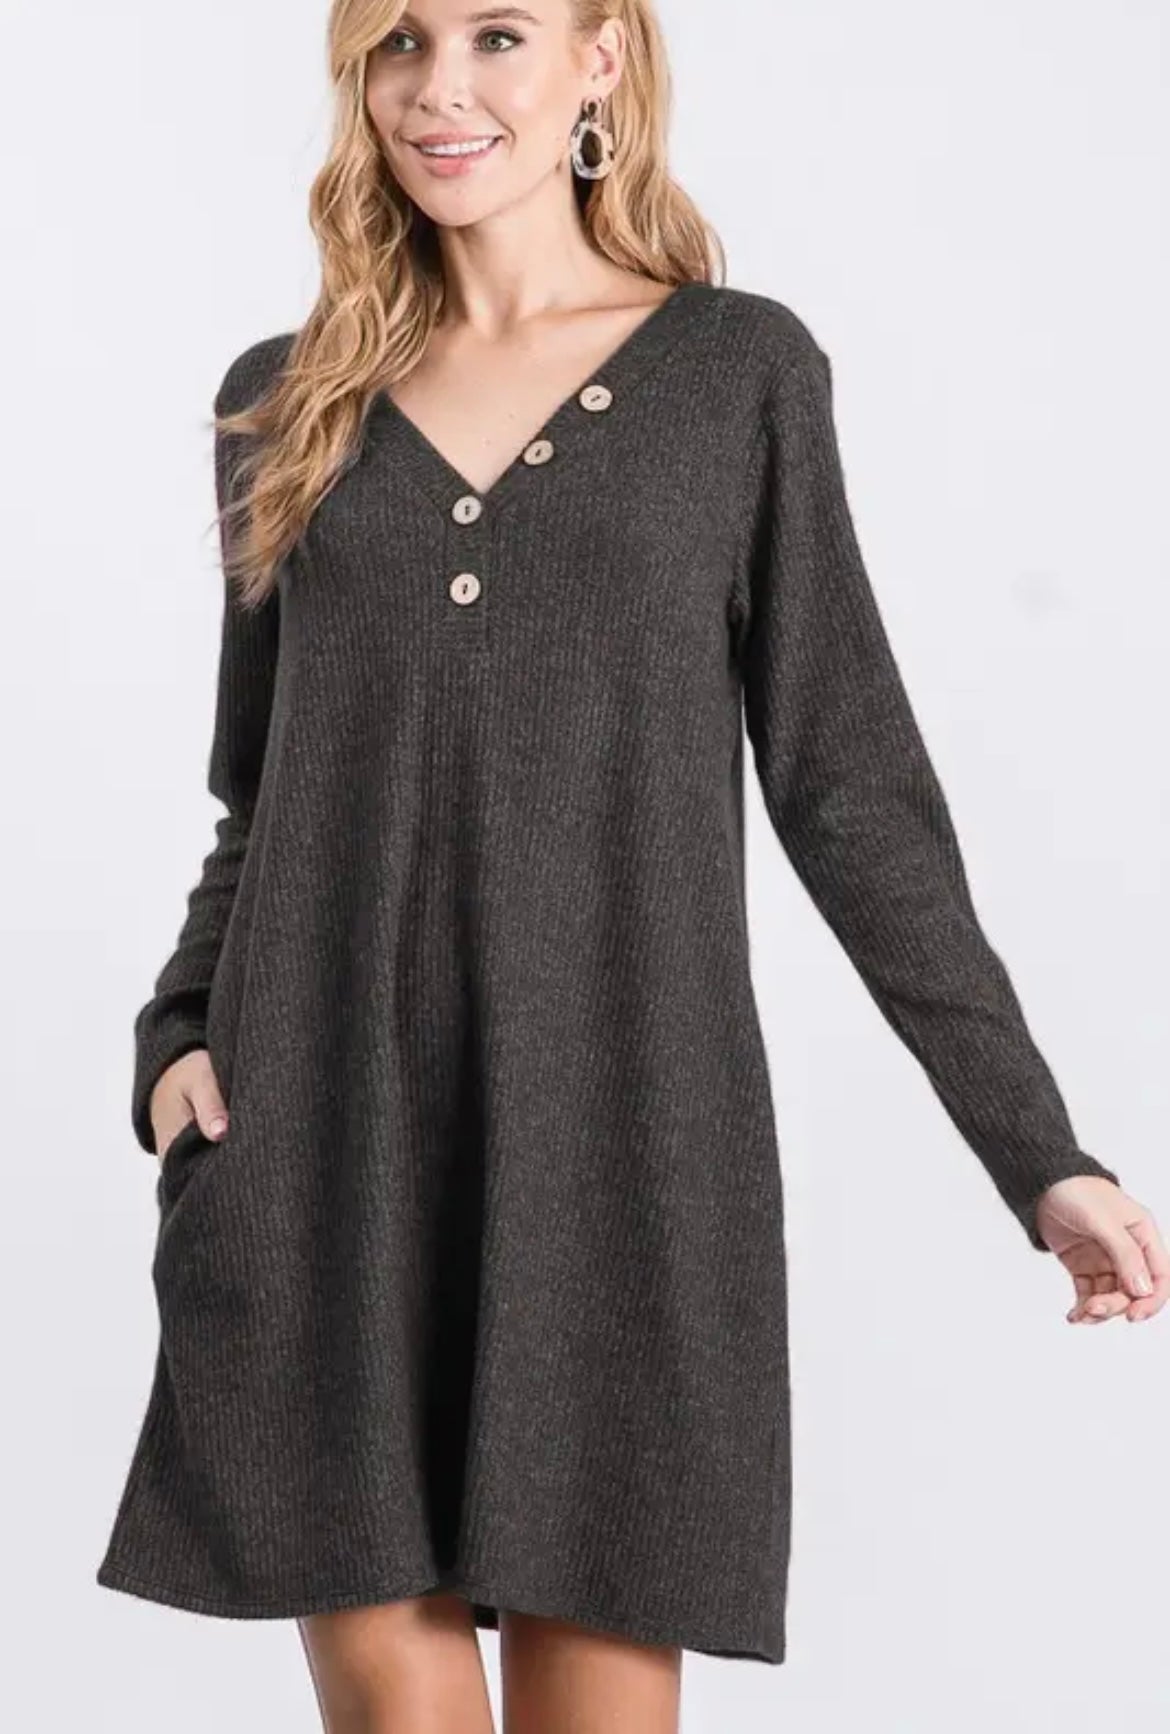 DOORBUSTER! Just add Boots! Charcoal Long Sleeve Dress